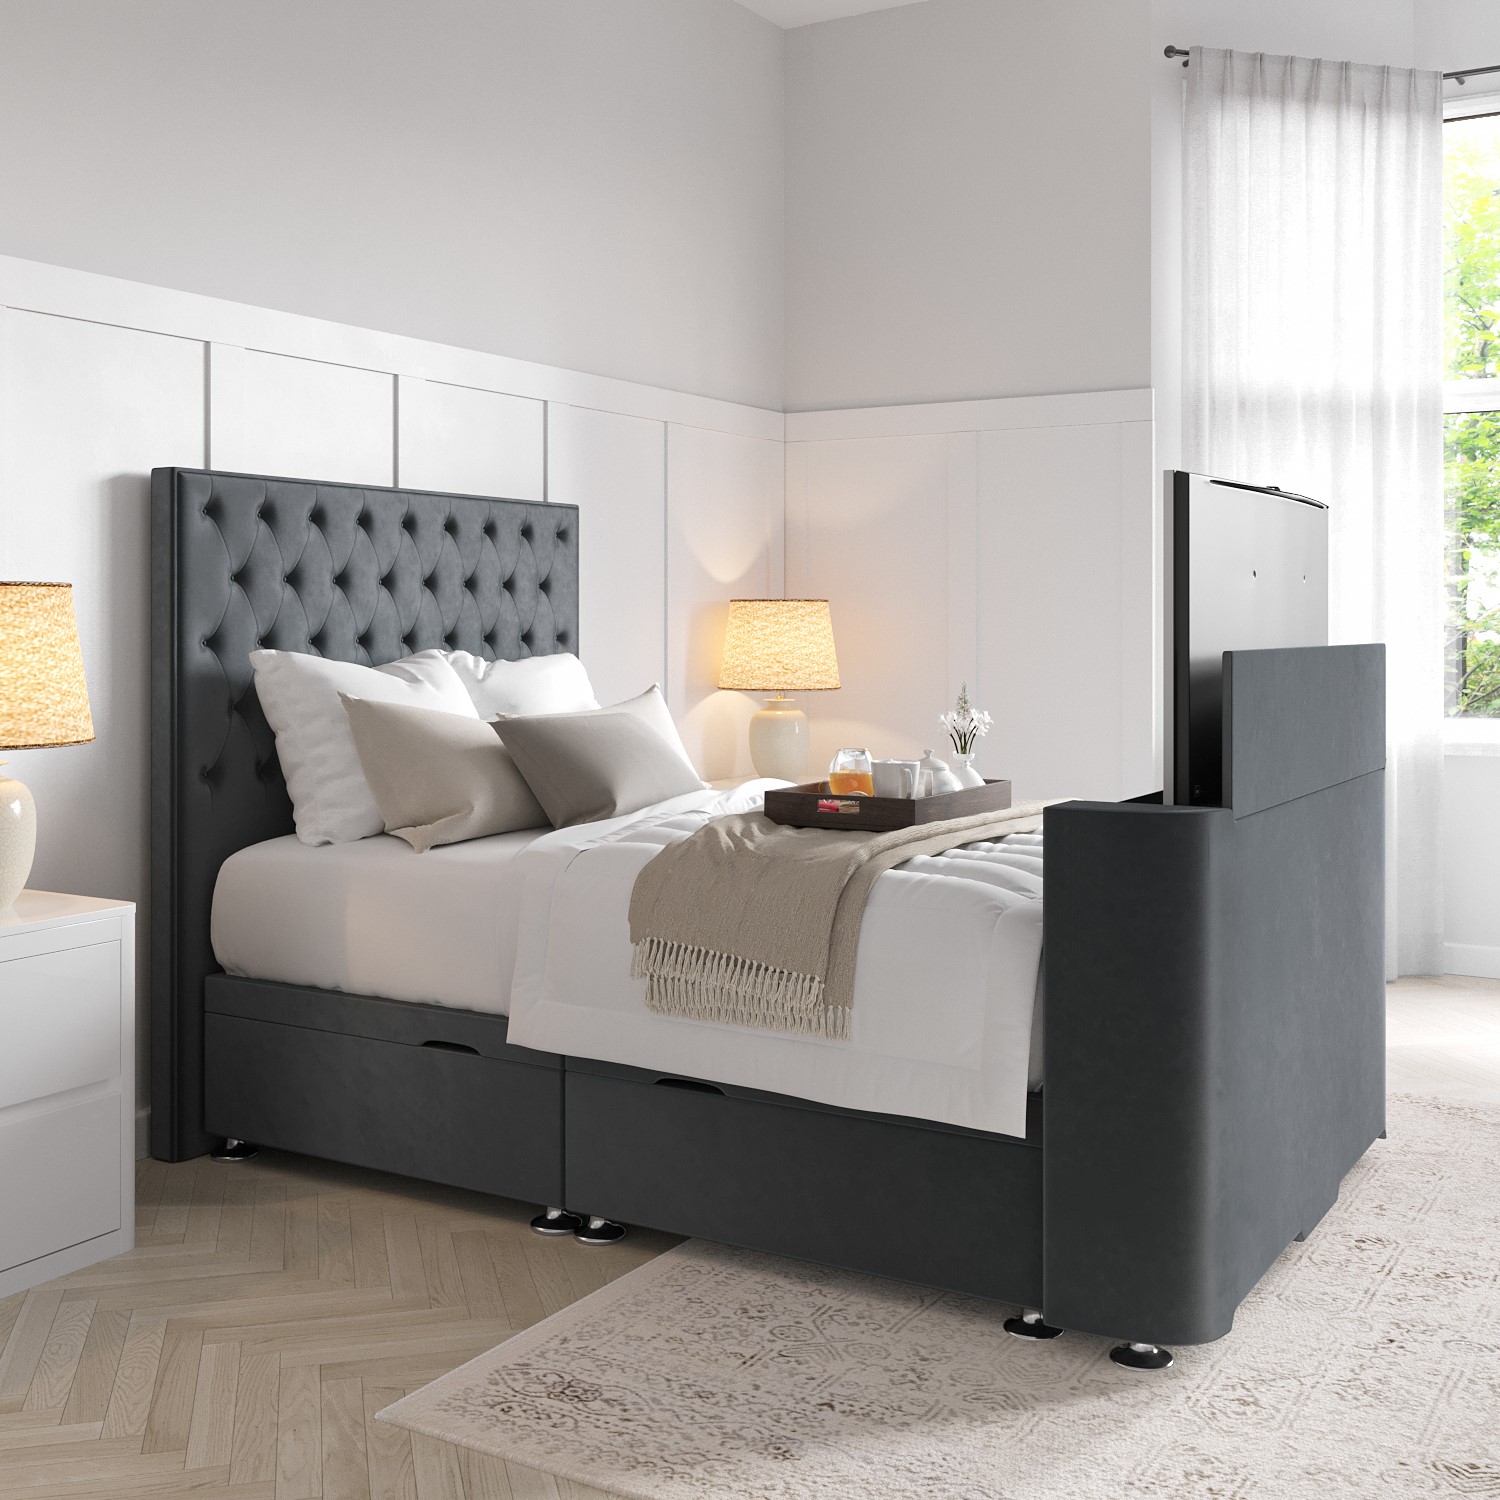 Photo of Super king tv bed in grey velvet with chesterfield headboard - avery